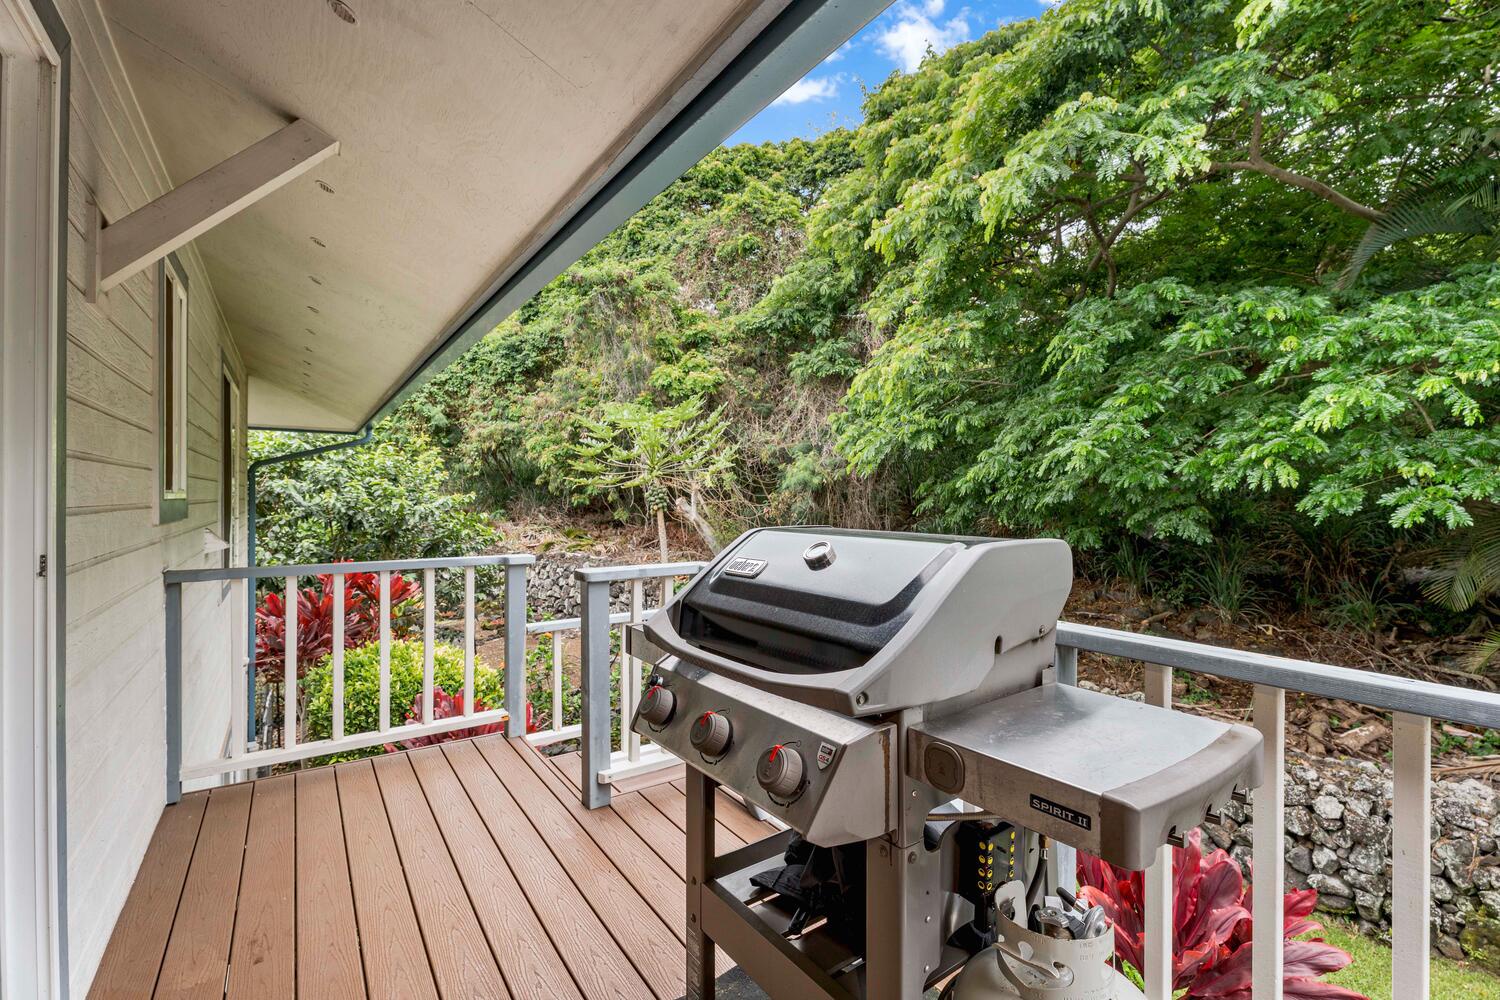 Kailua Kona Vacation Rentals, Honu O Kai (Turtle of the Sea) - BBQ while enjoying the garden views, just right off the dining area.